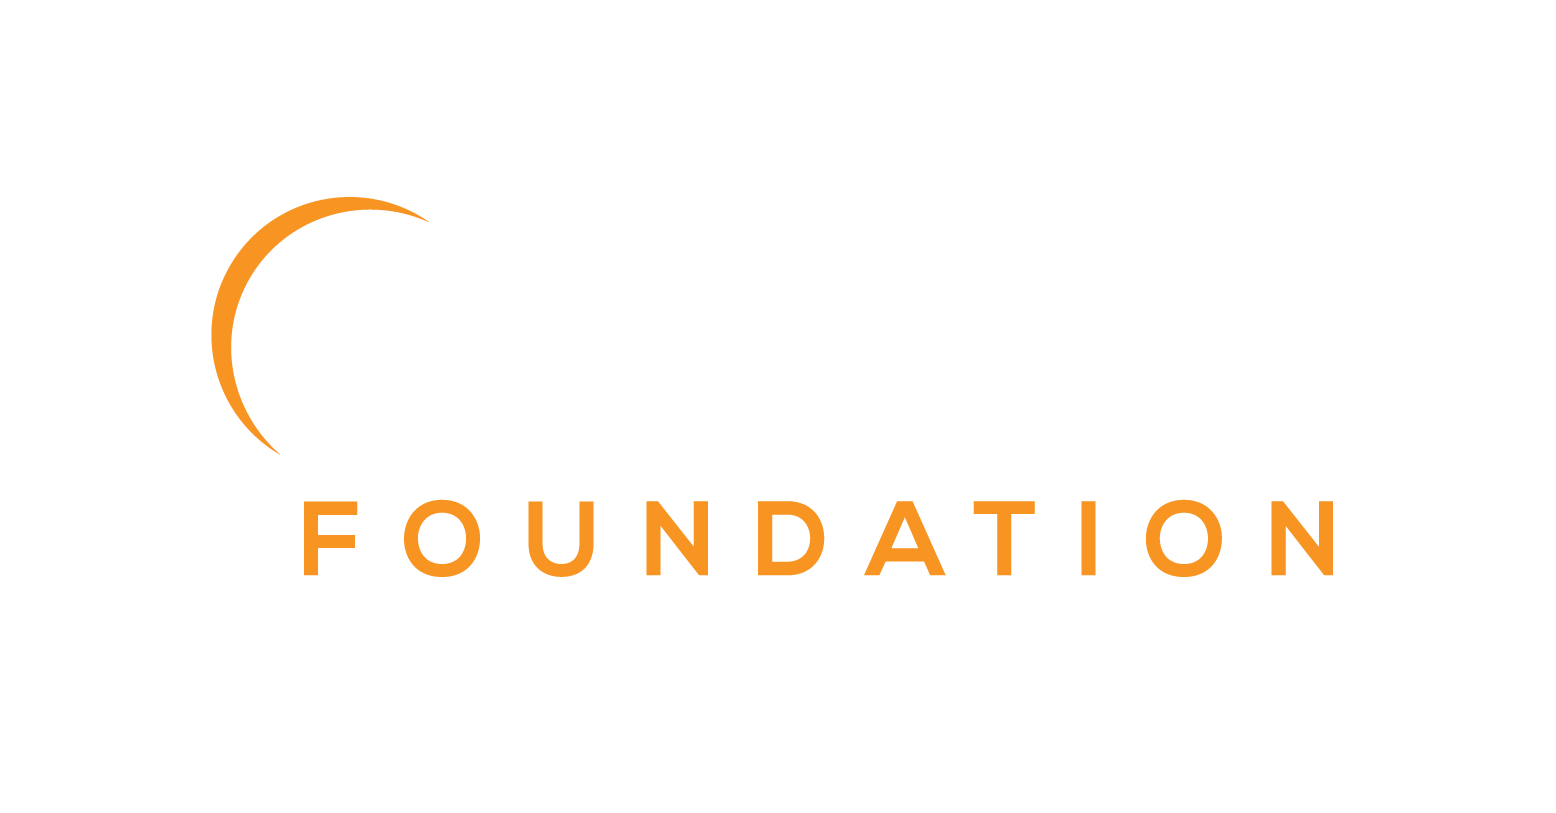 Eclipse Logos and Artwork The Eclipse Foundation